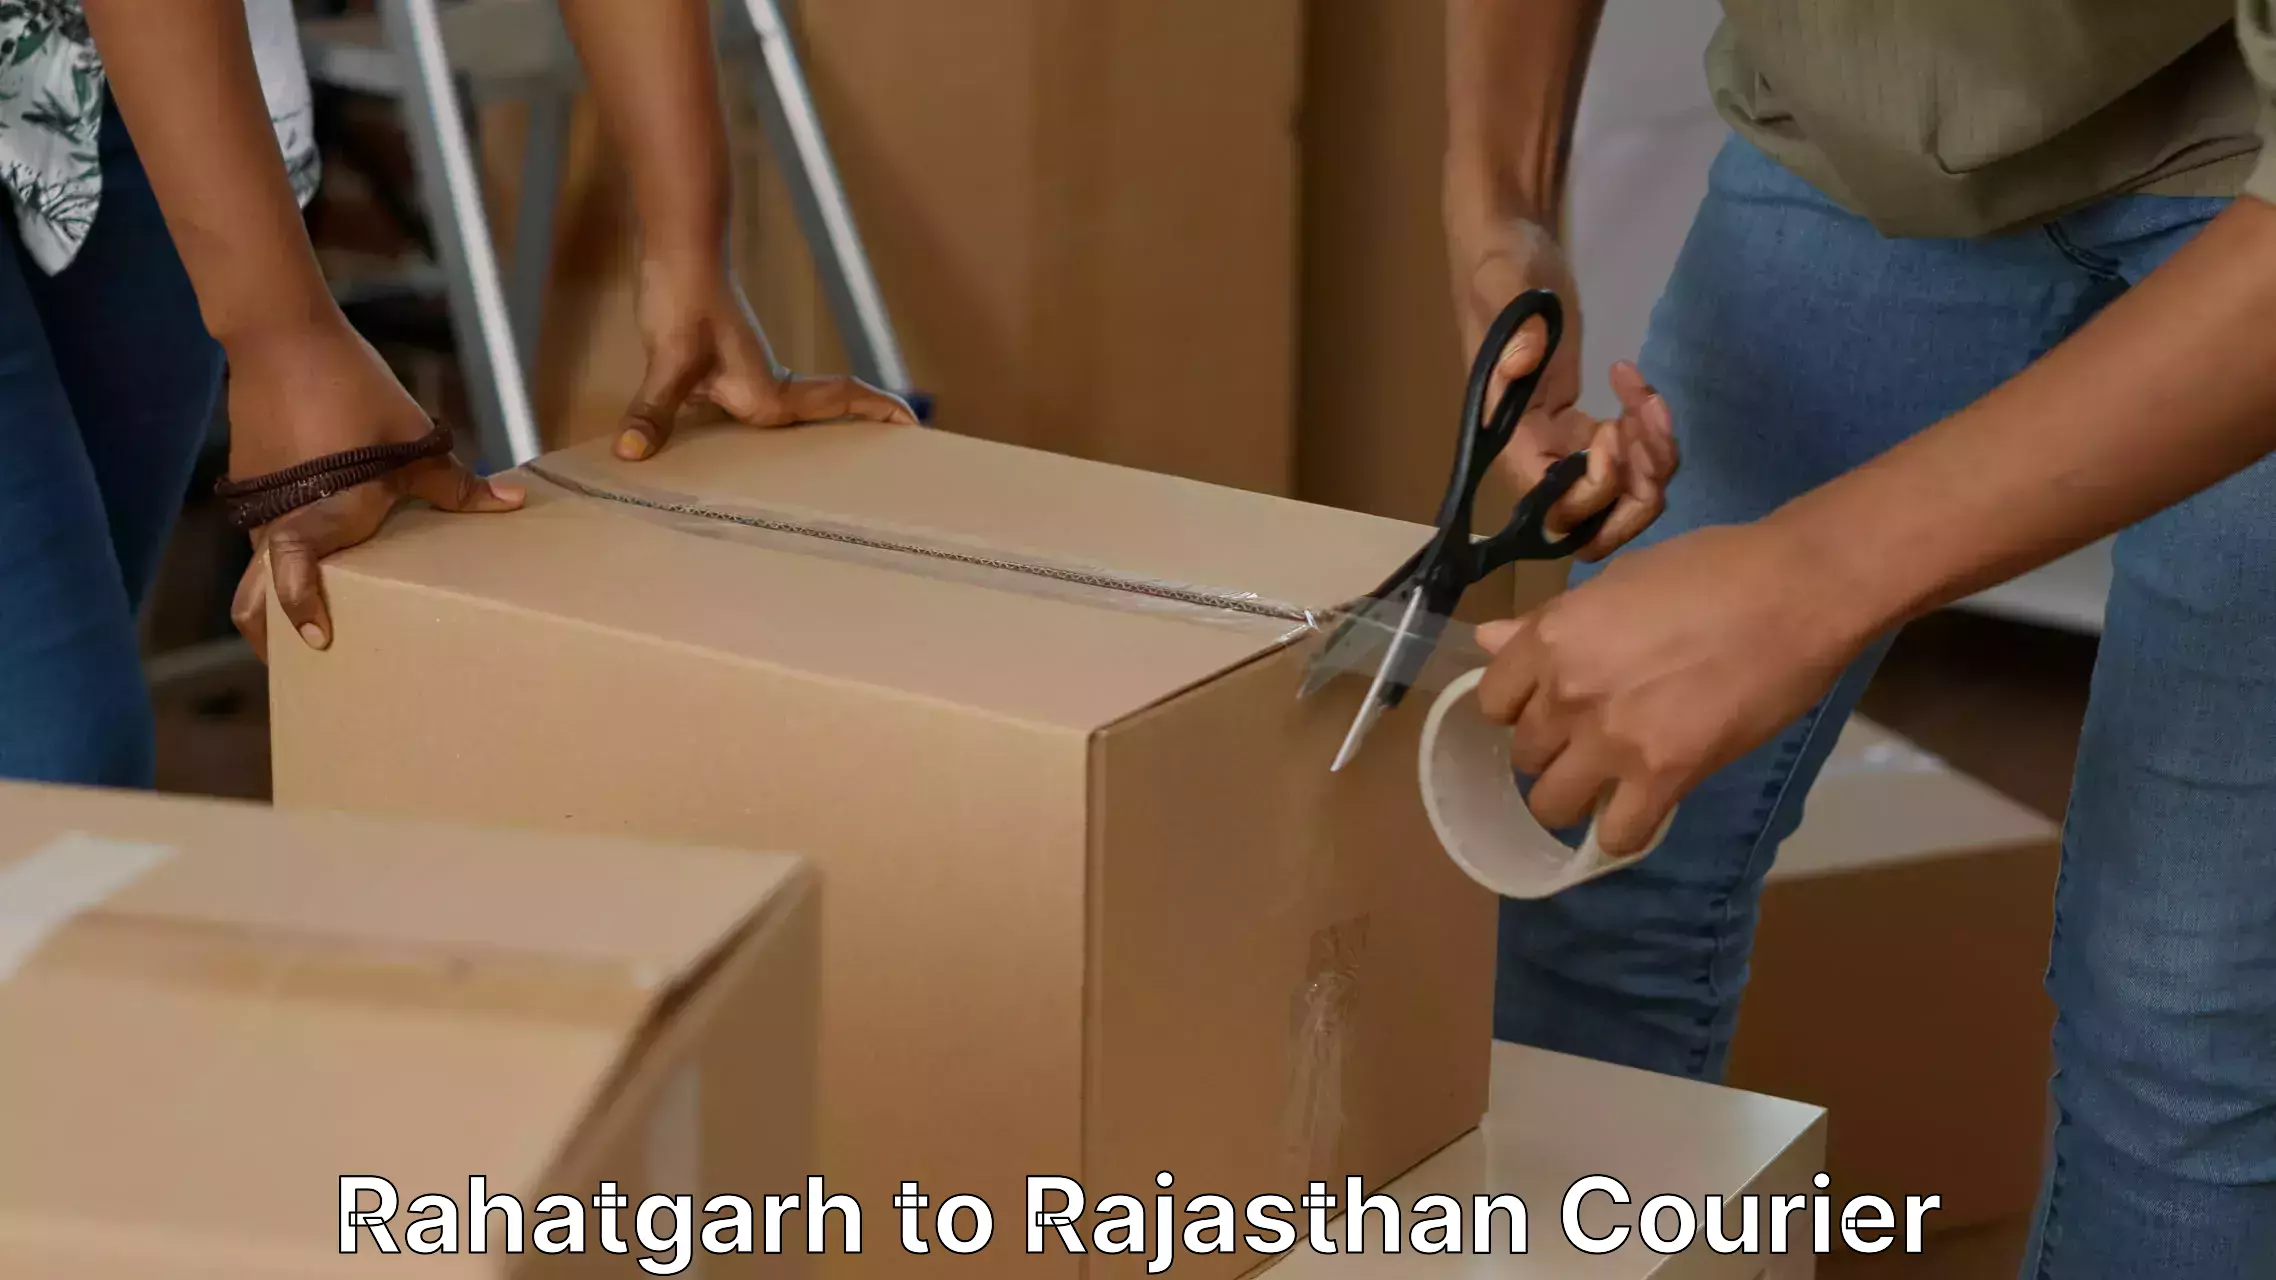 Furniture delivery service Rahatgarh to Pali